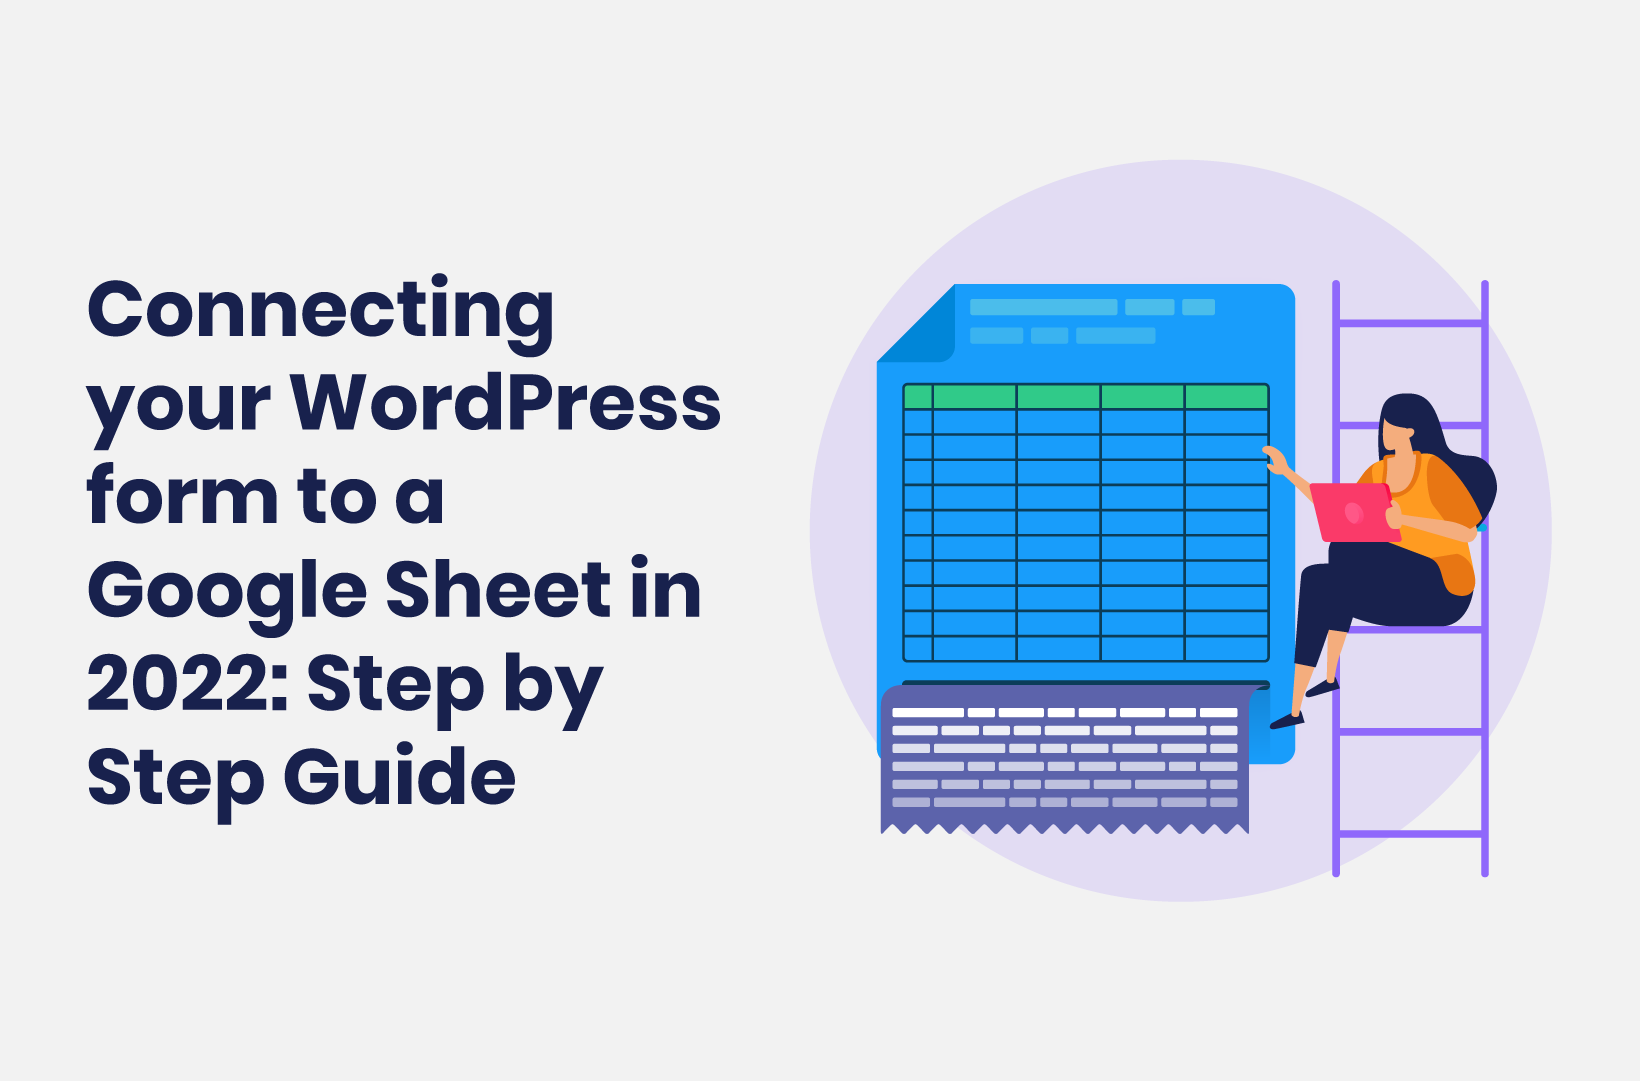 Intro image by blog article Connecting your WordPress form to a Google Sheet in 2022 - Step by Step Guide